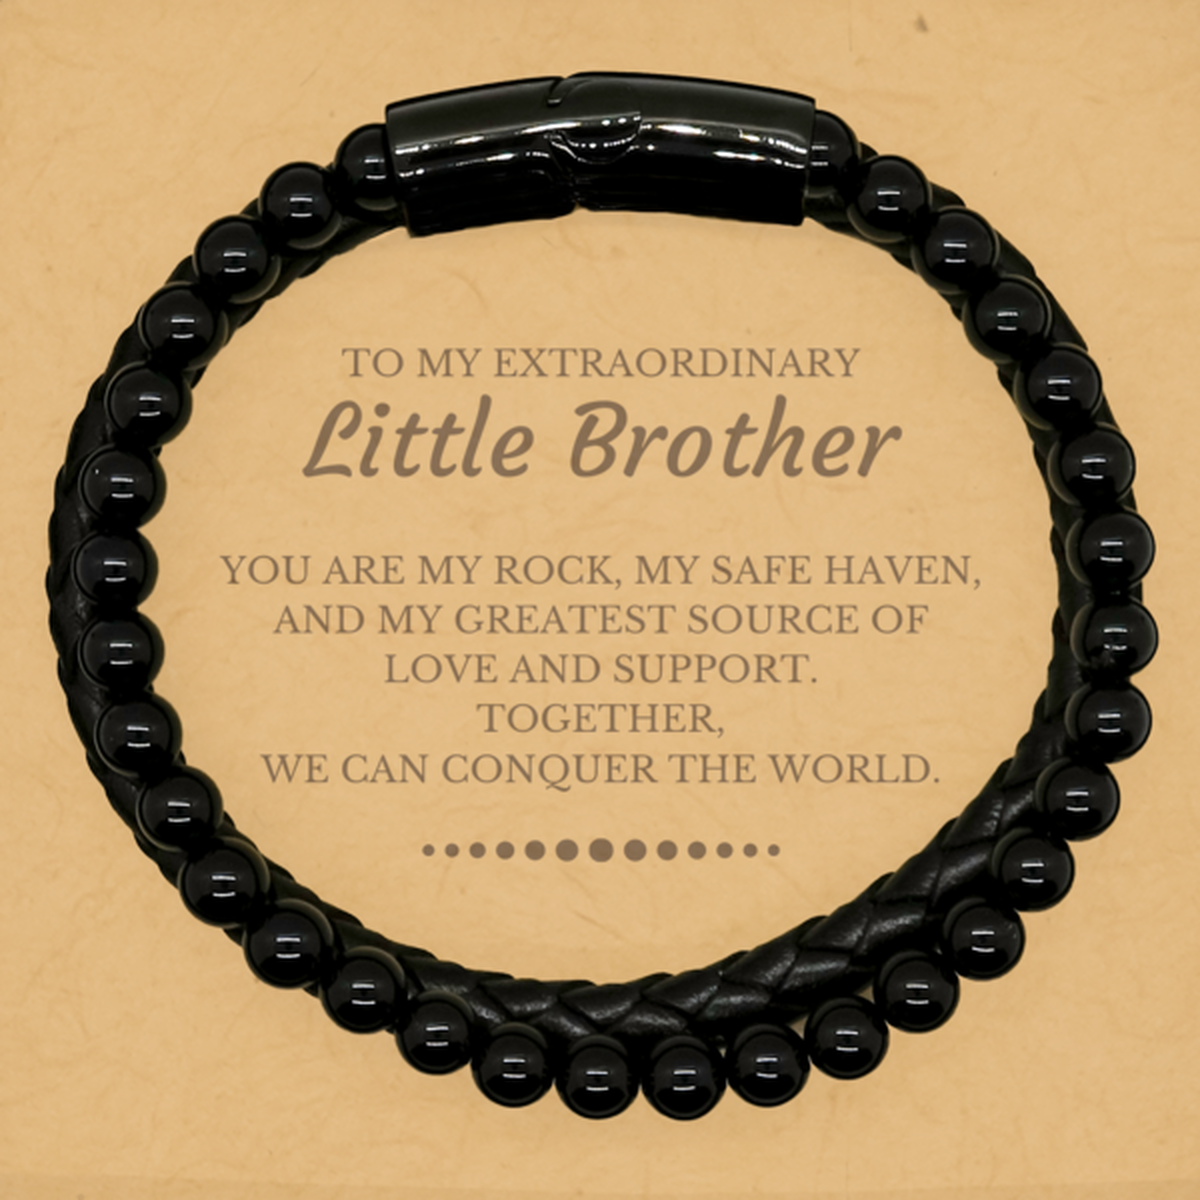 To My Extraordinary Little Brother Gifts, Together, we can conquer the world, Birthday Stone Leather Bracelets For Little Brother, Christmas Gifts For Little Brother